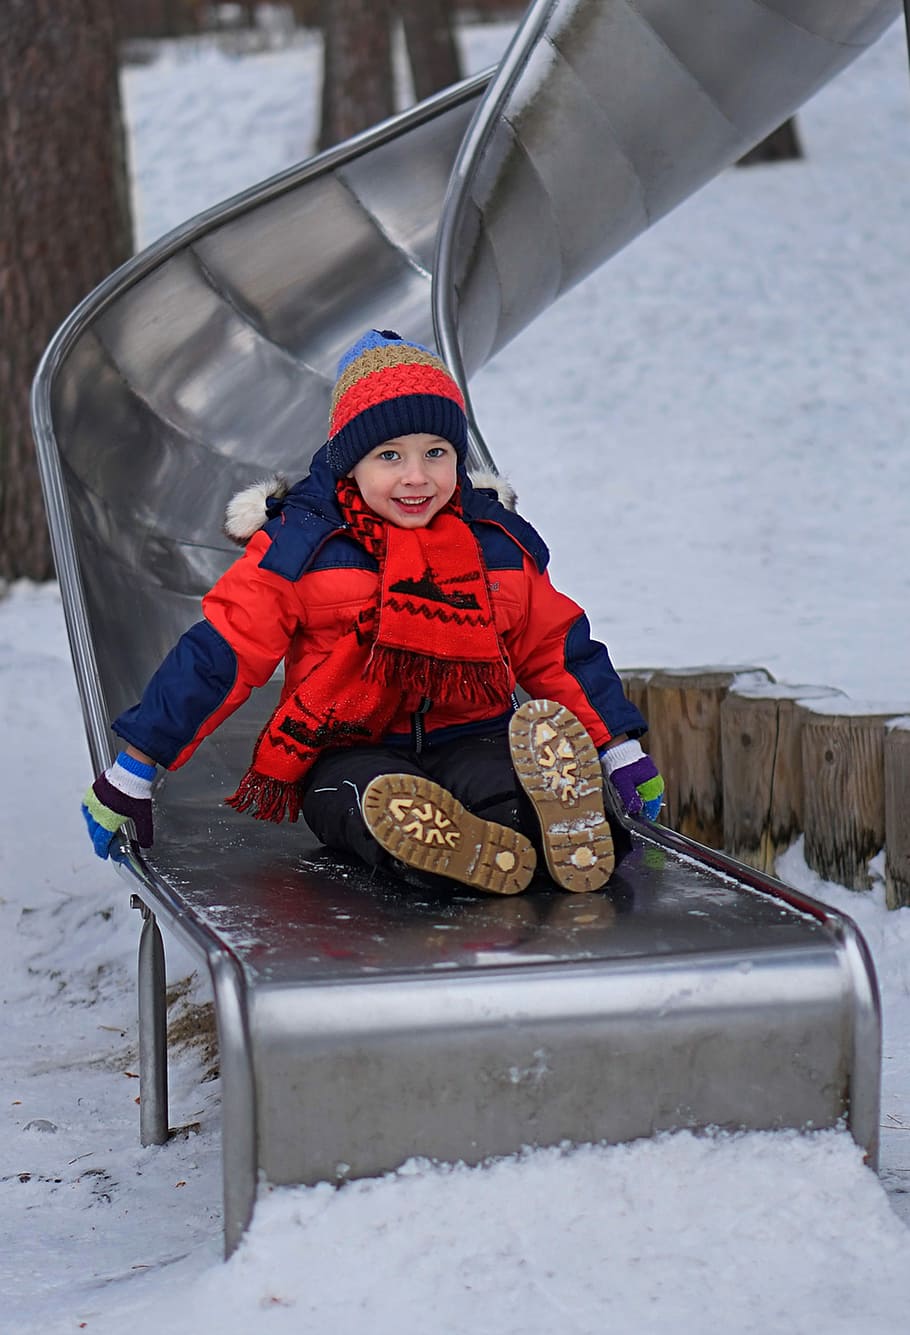 winter, snow, coldly, boy, jacket, one, baby, fun, outdoors